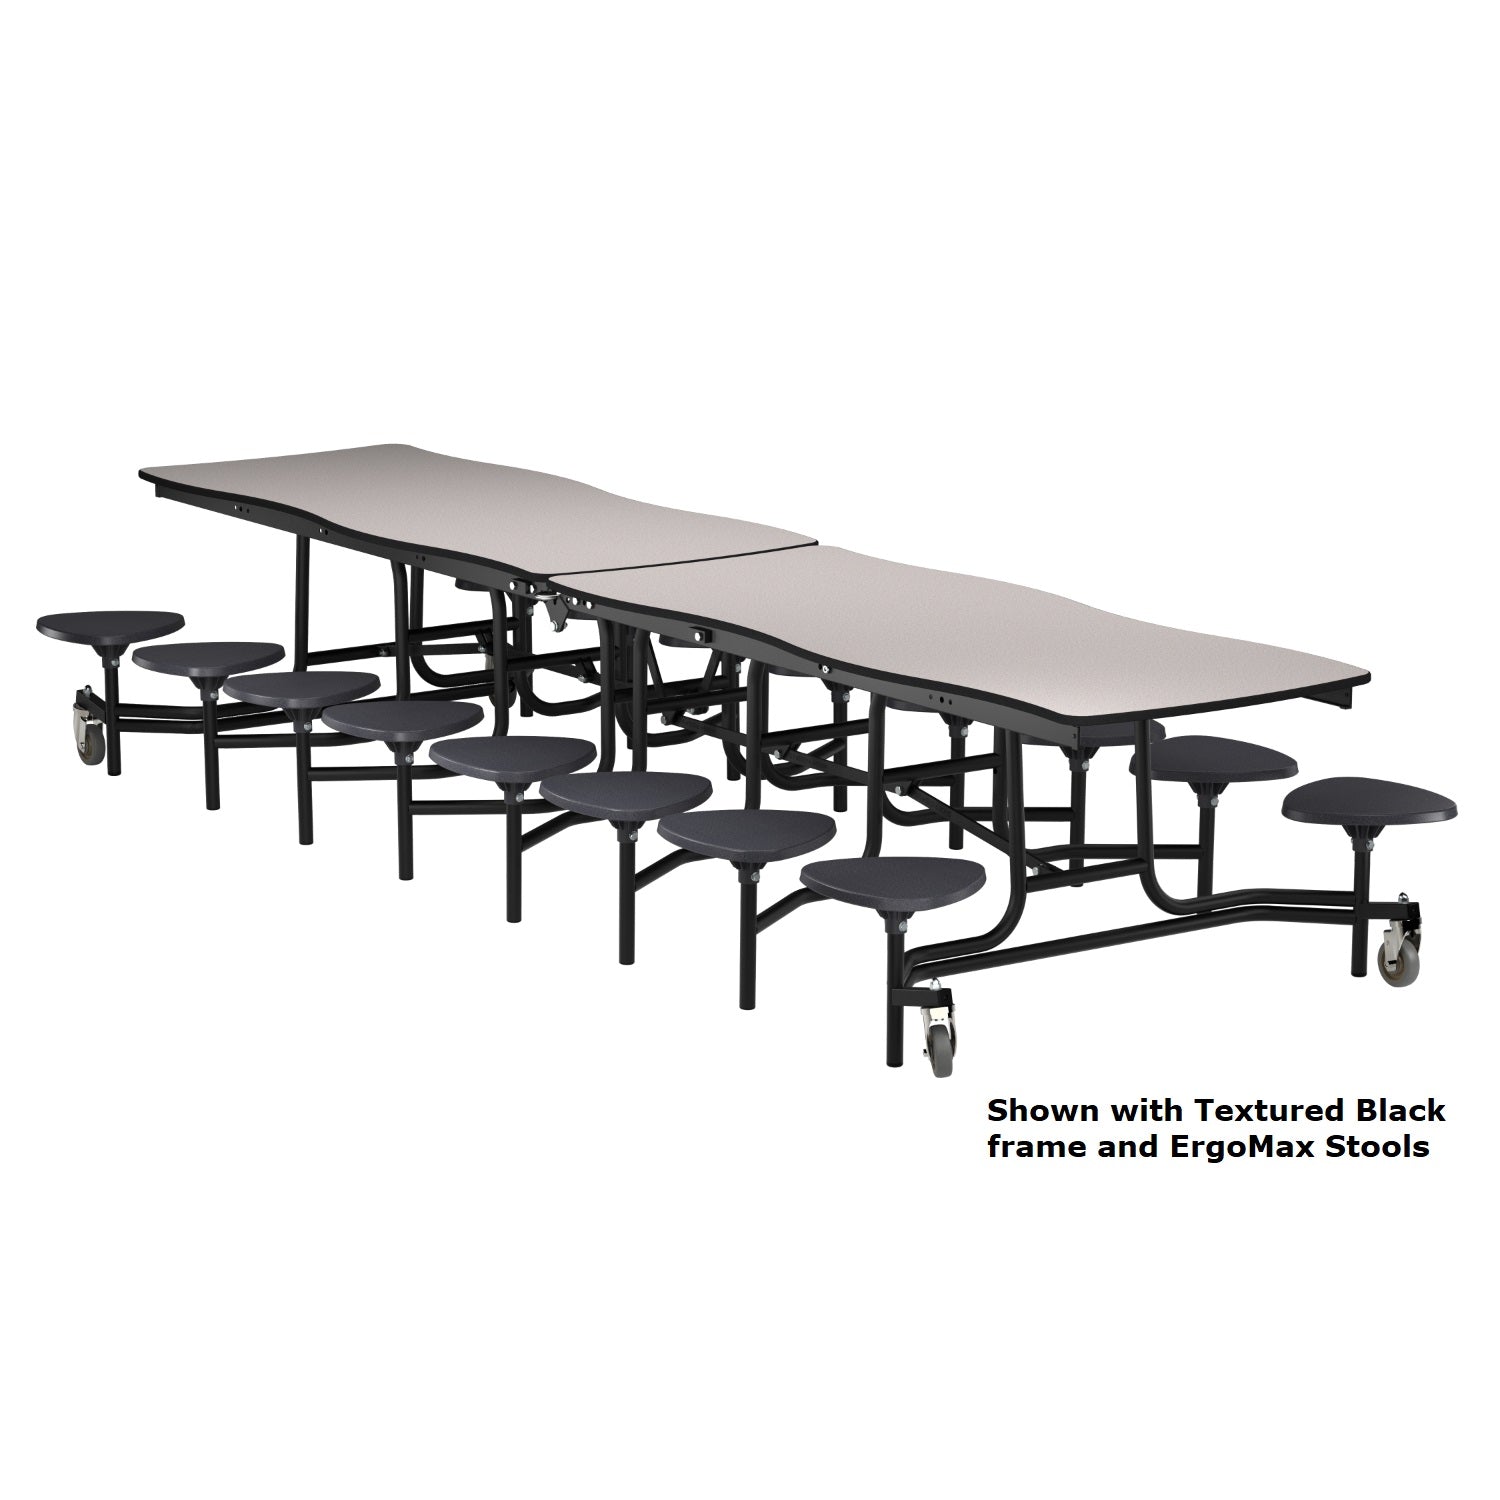 Mobile Cafeteria Table with 16 Stools, 12' Swerve, Particleboard Core, Vinyl T-Mold Edge, Textured Black Frame